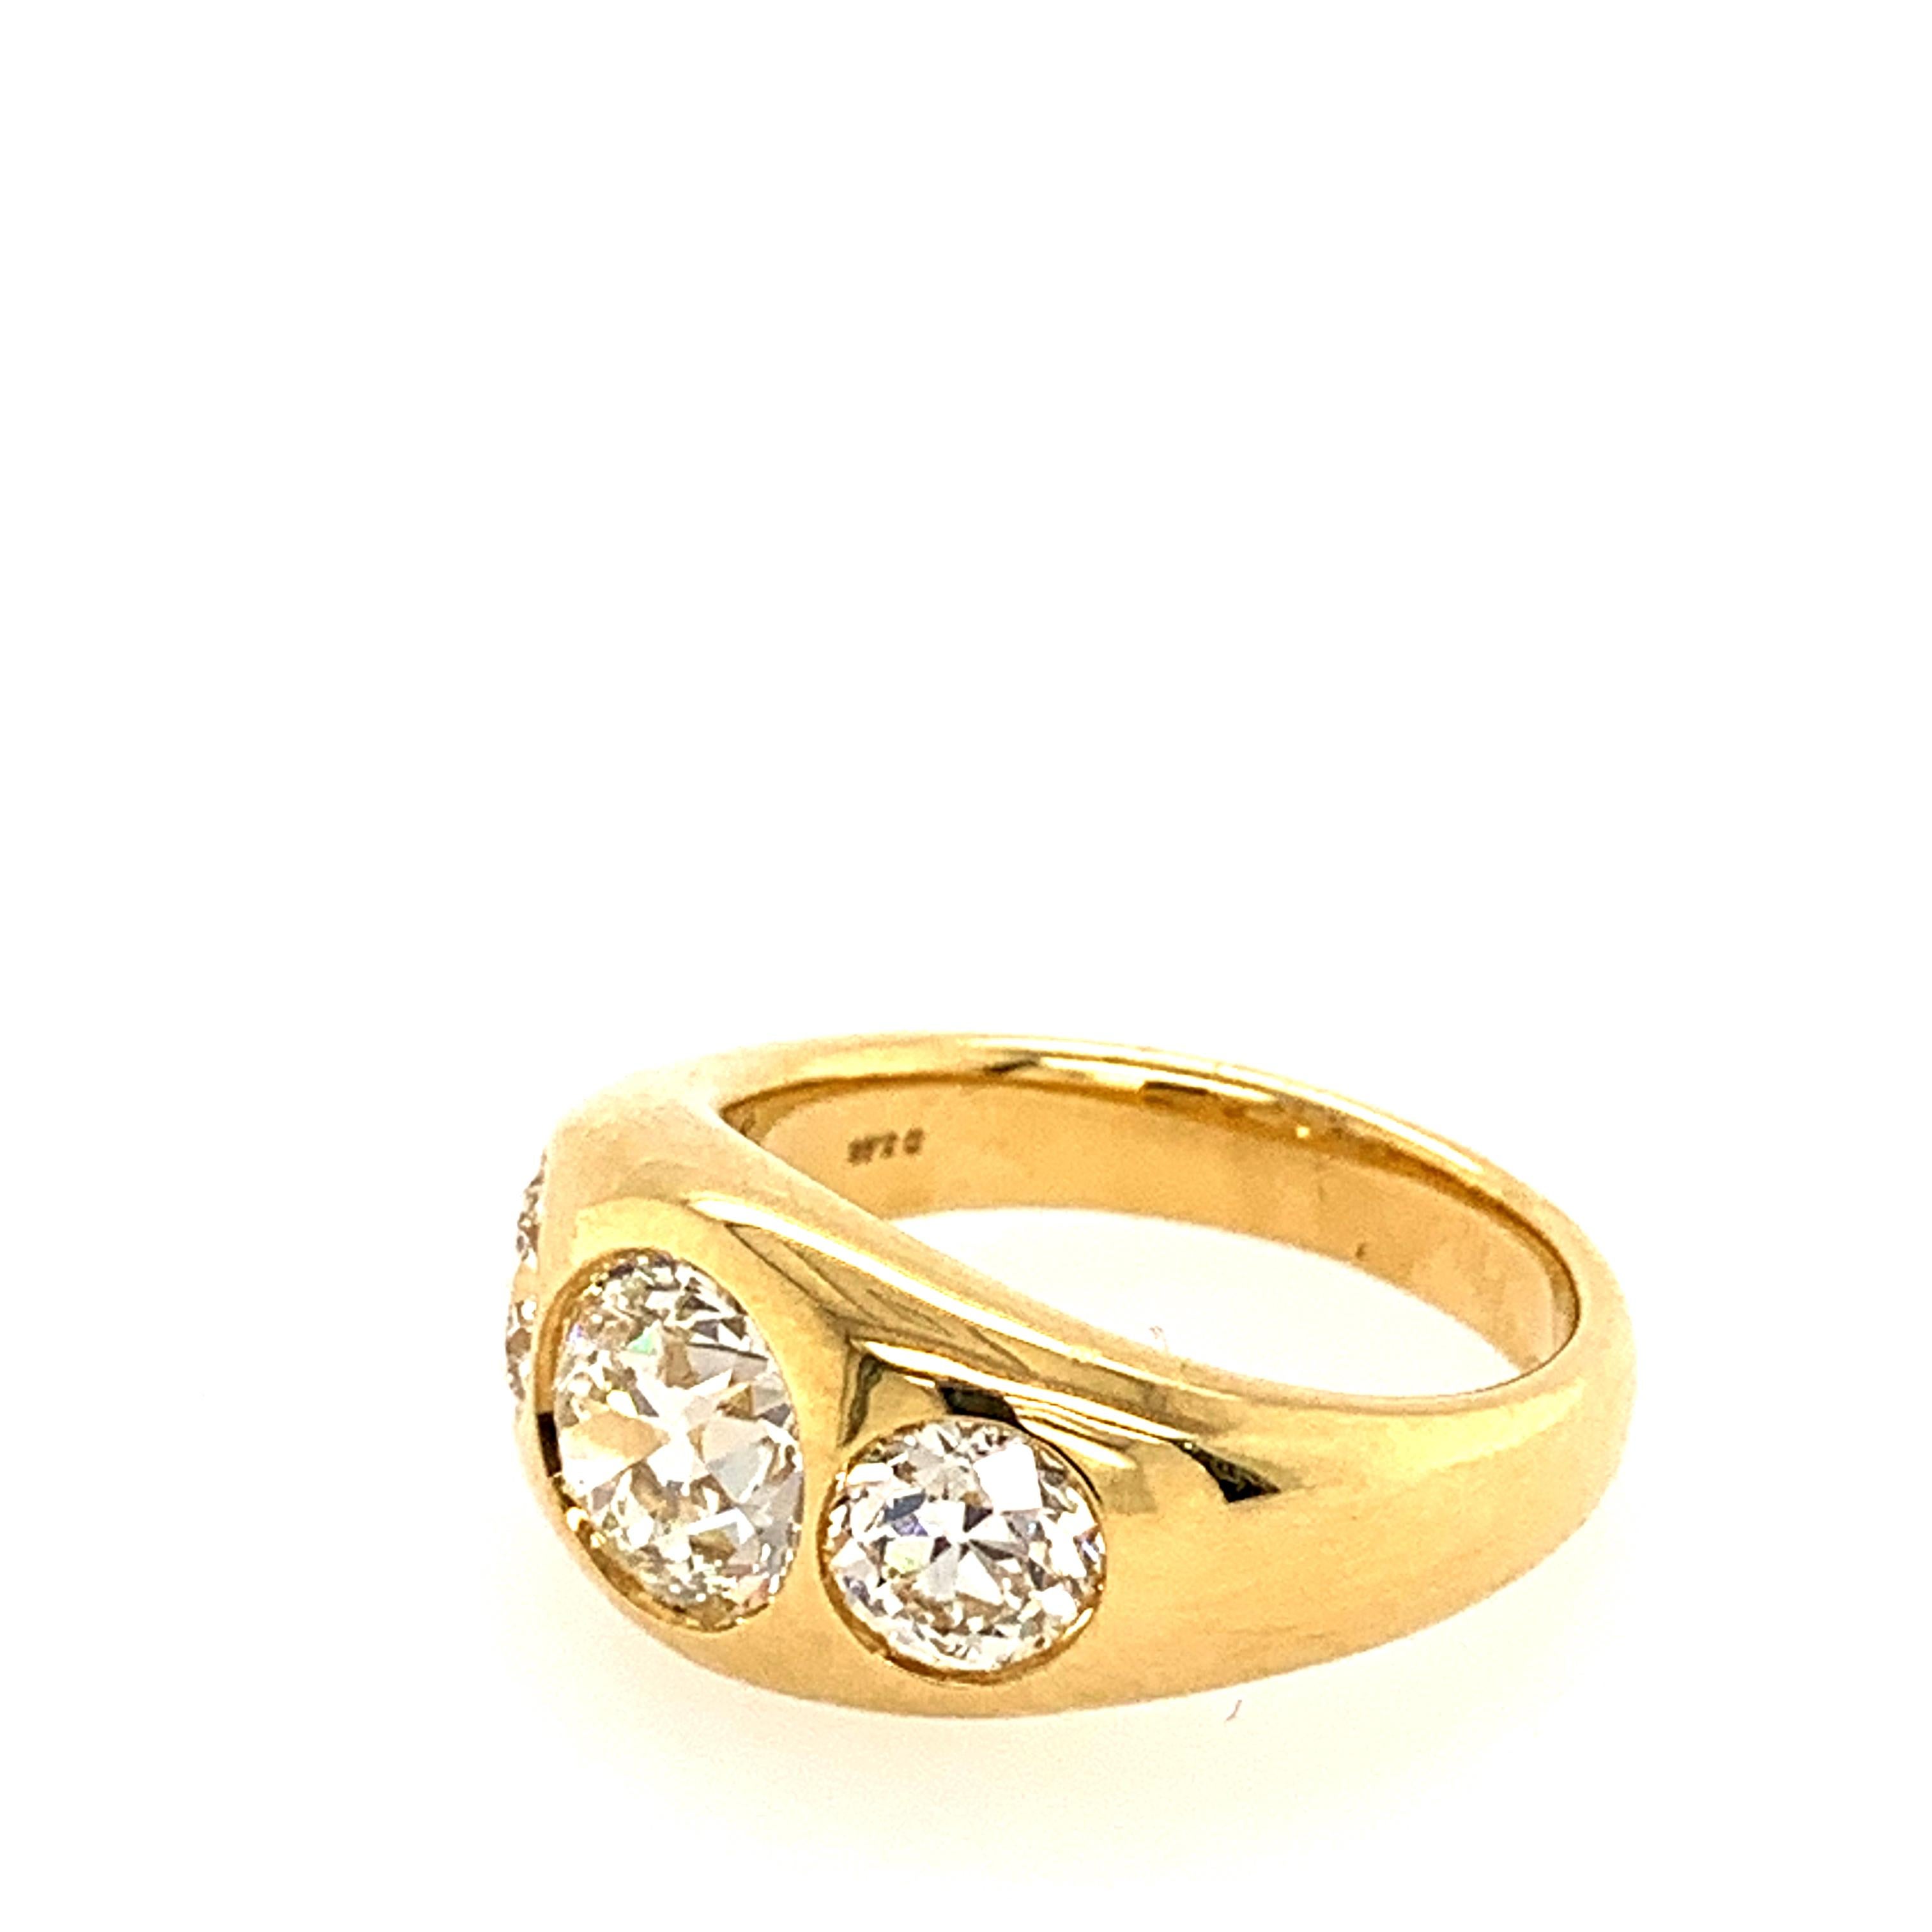 18 Karat Yellow Gold with center round diamond weighing 1.63 Carats and 2 round diamonds on the side weighing a total 1.24 carats.